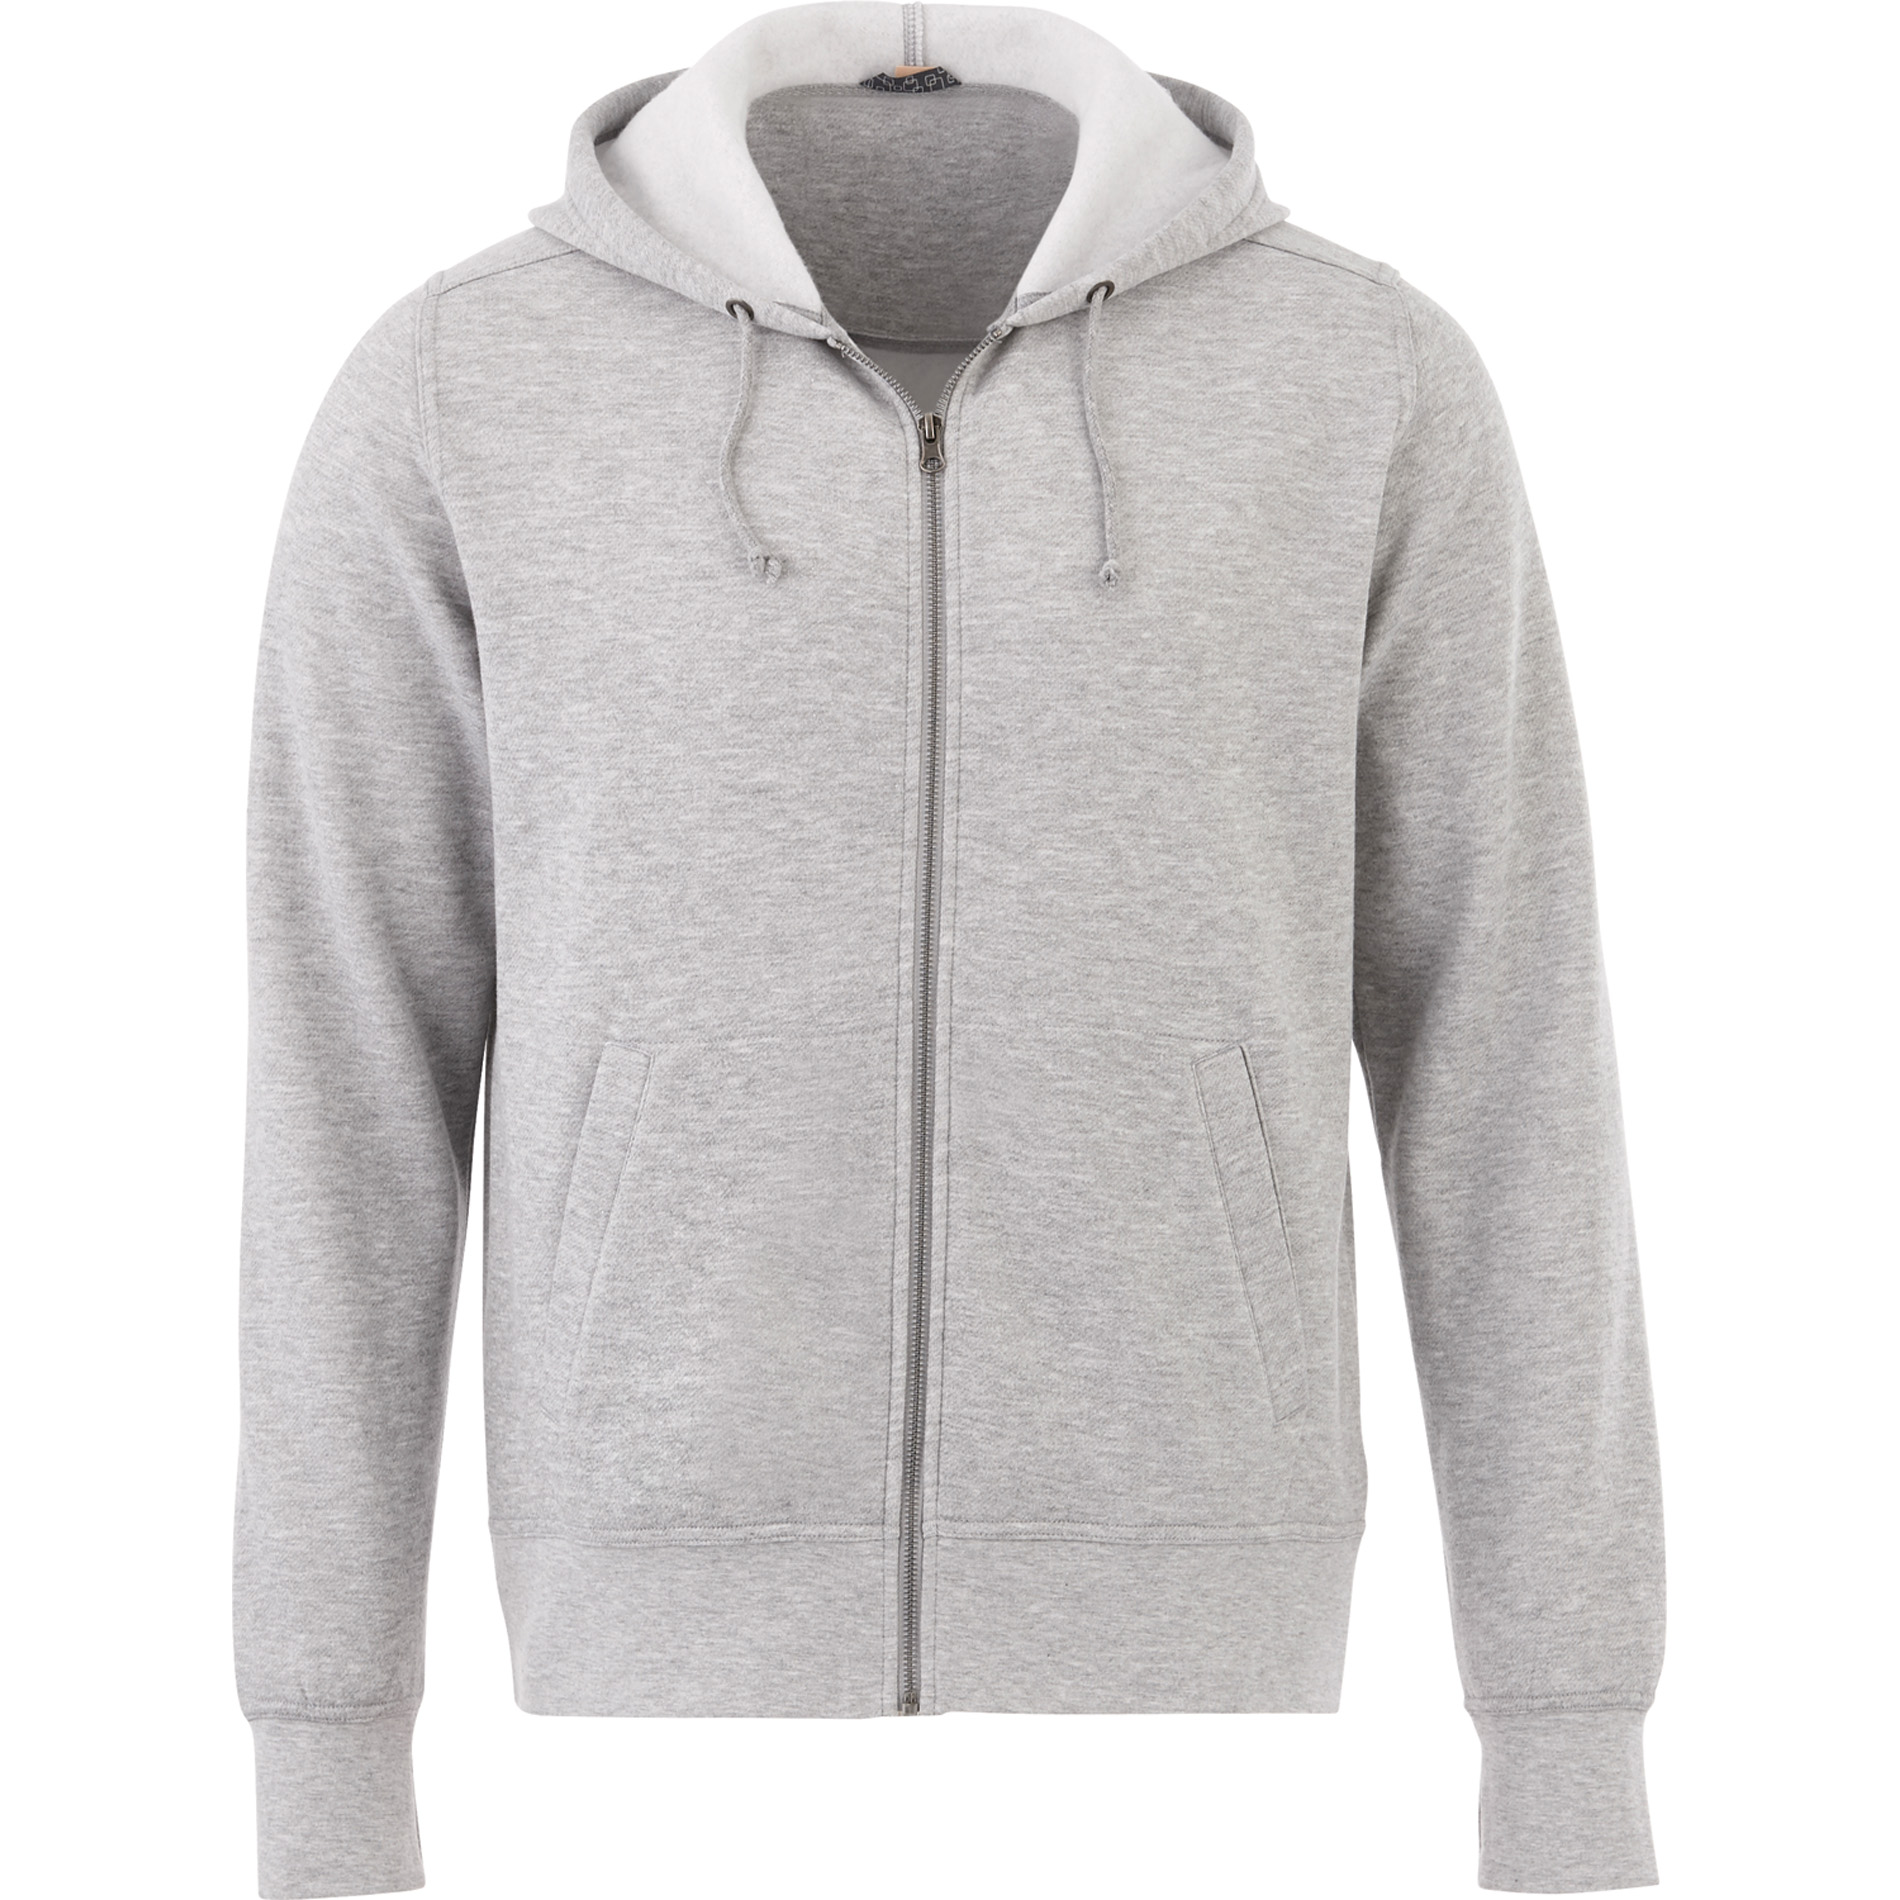 click to view Heather Grey